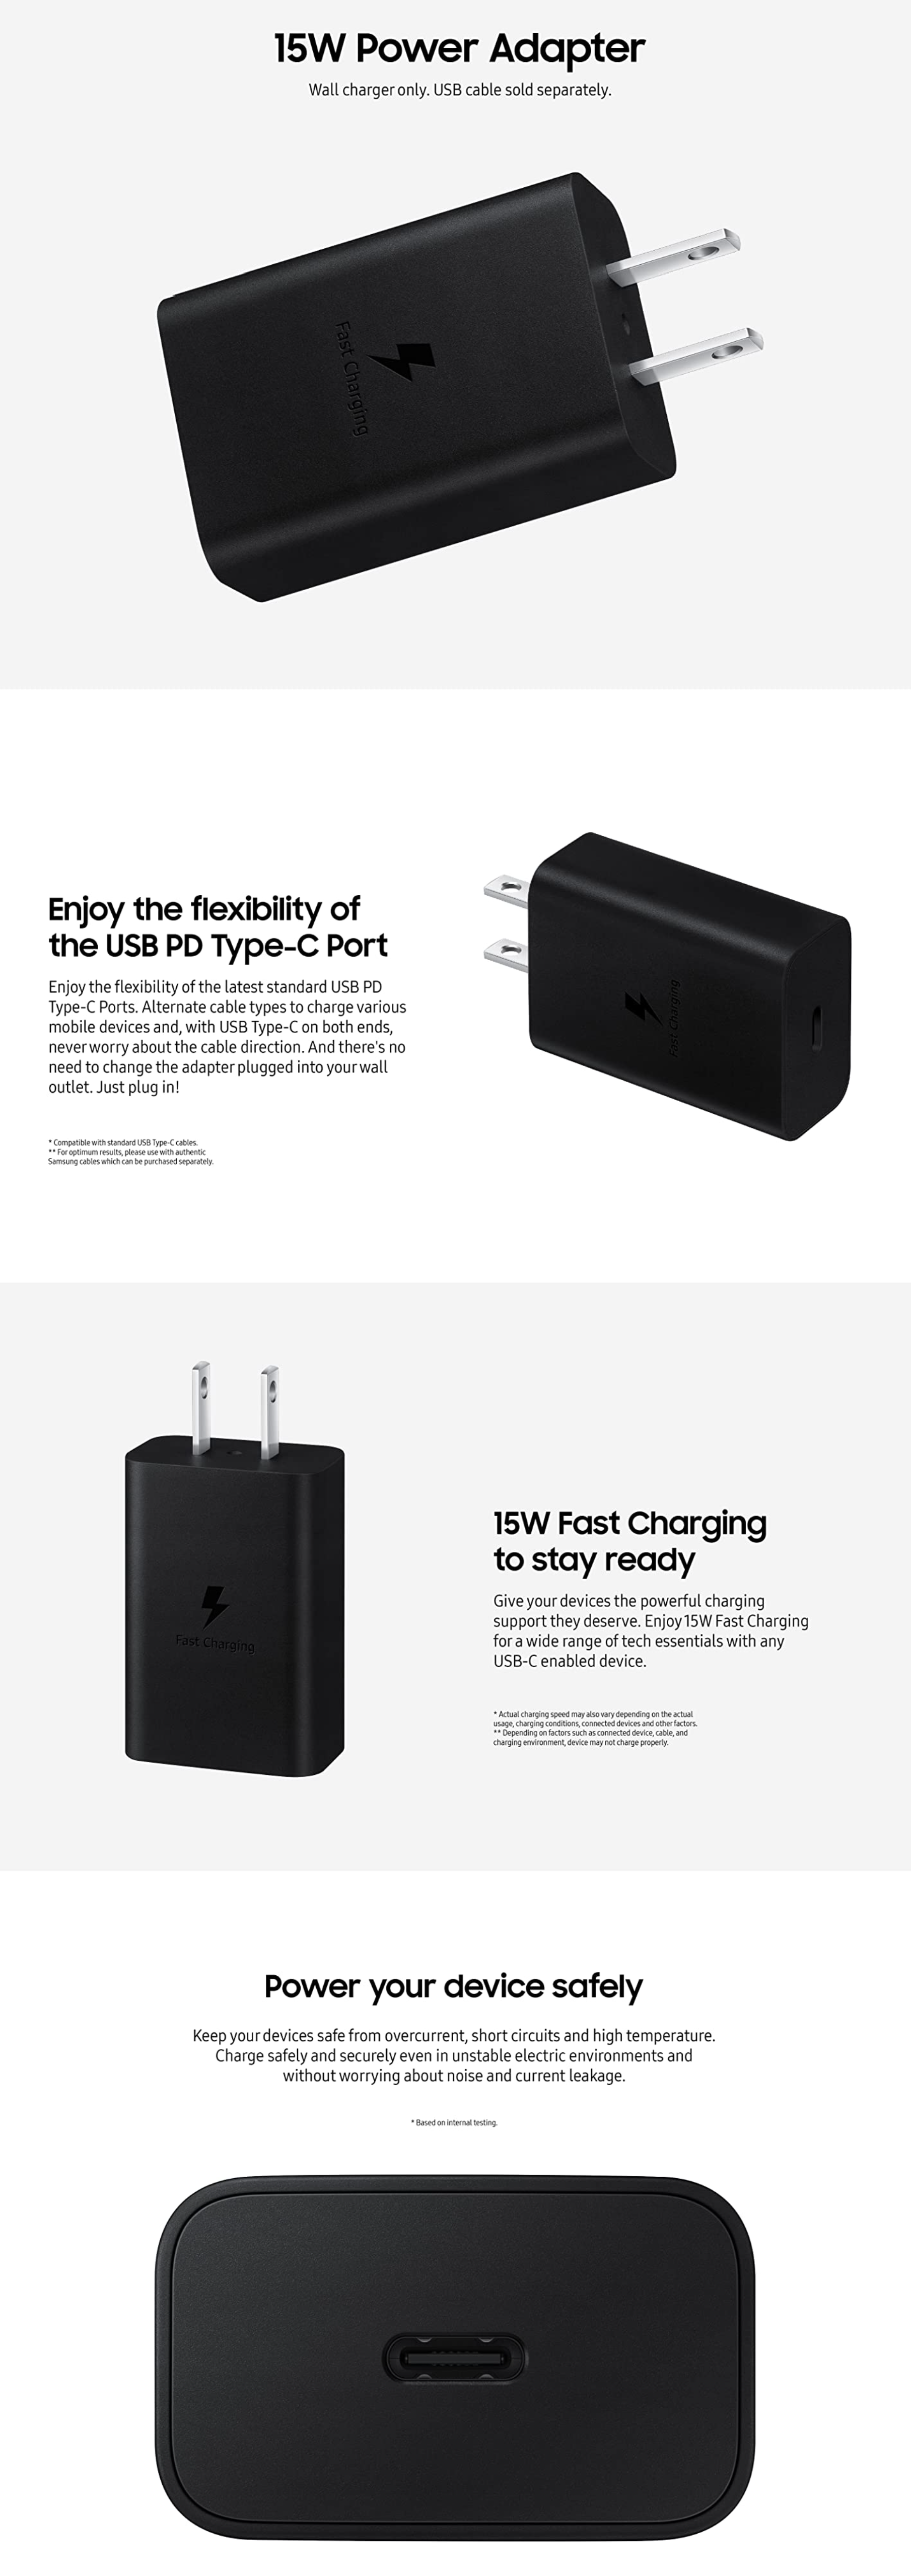 Samsung 15W Wall Charger Type C Only (Cable not Included), Black